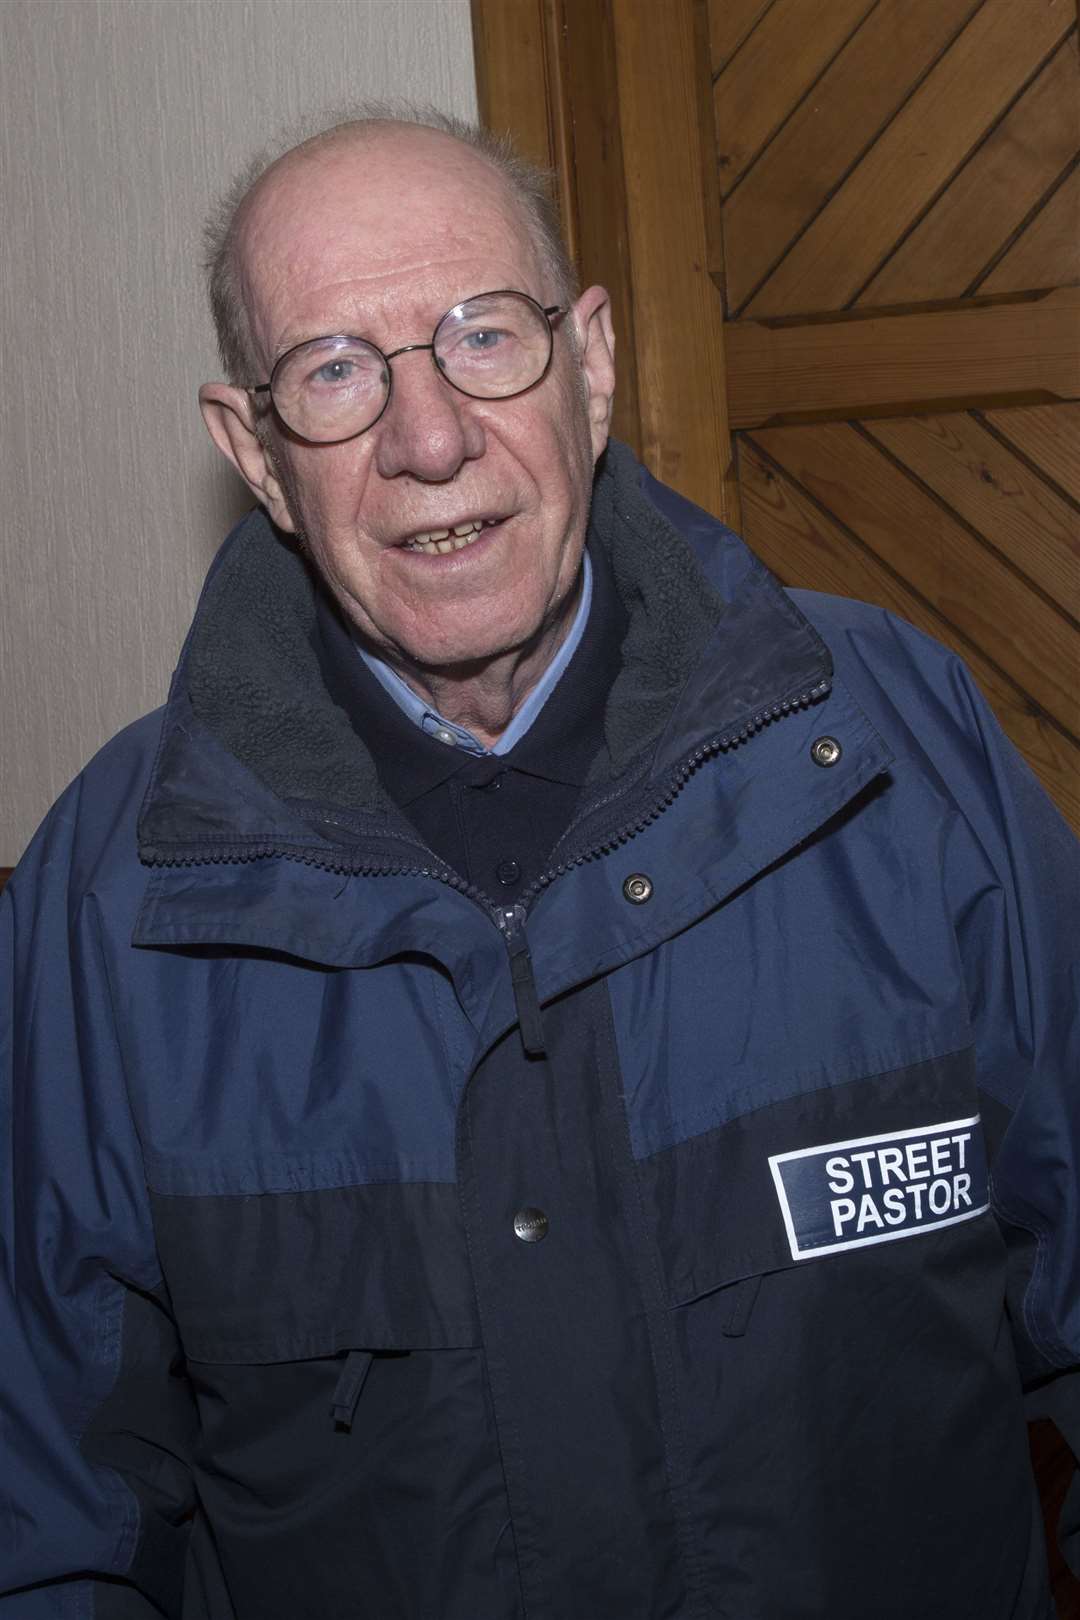 Caithness Street Pastors co-ordinator, Alan Finch, says the three additional volunteers will allow the group to expand its activities. Photo: Robert MacDonald/Northern Studios